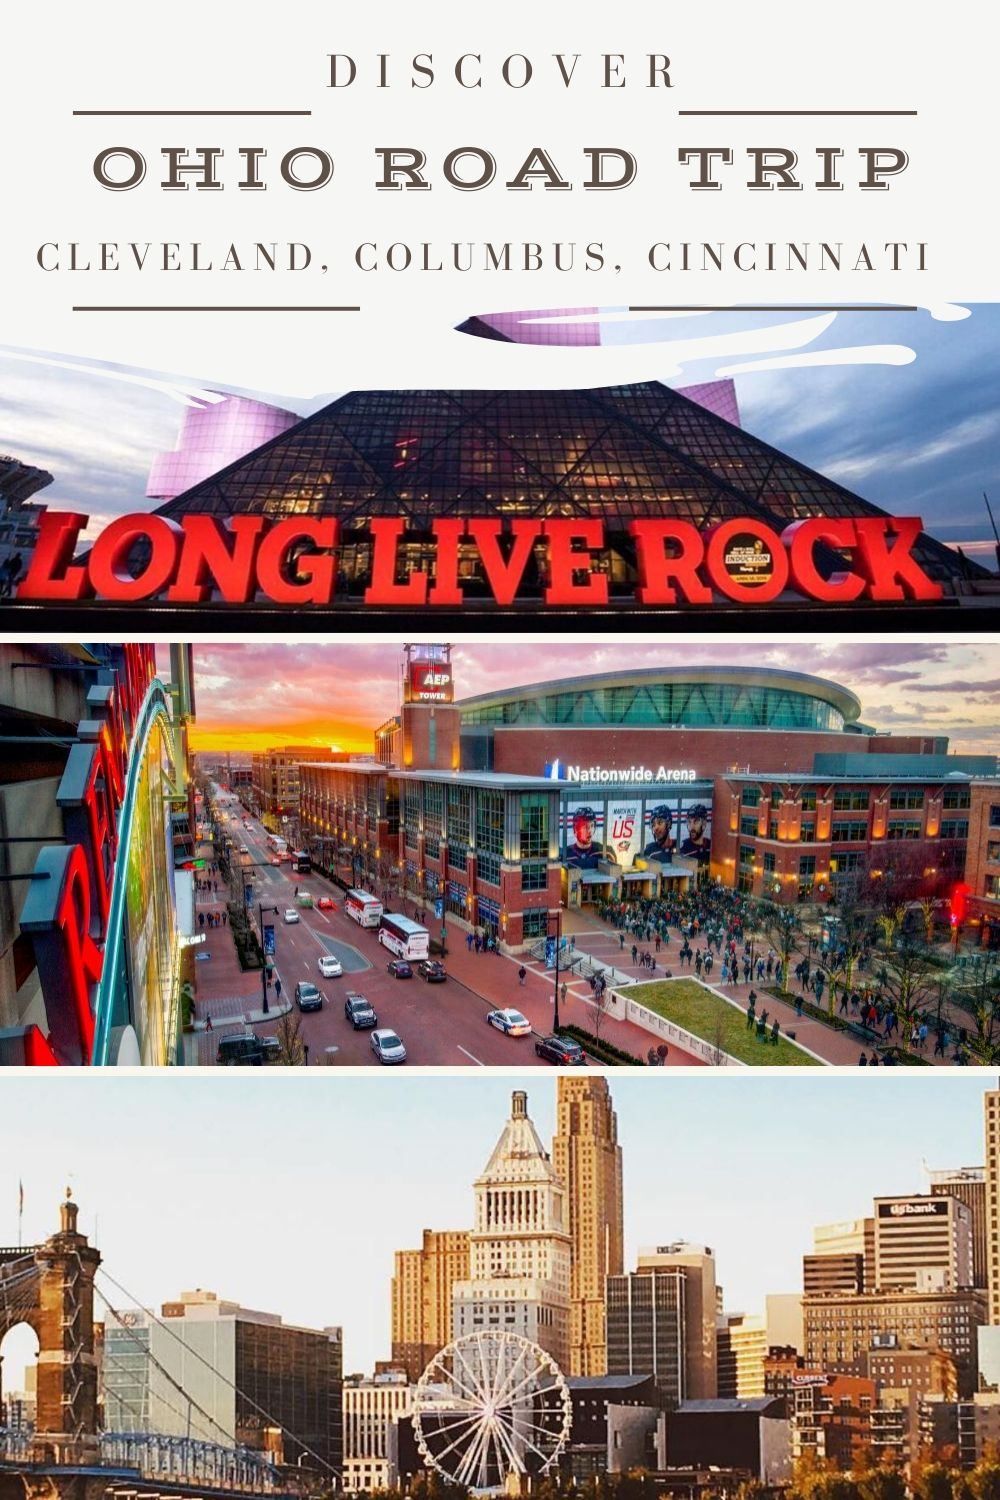 Take a road trip through Ohio's major cities (Cleveland, Columbus and Cincinnati) to discover Ohio's amazing history, rich culture and great food. Fun attractions make it great for family road trips. See the Cleveland Zoo, Rock 'n Roll Hall of Fame, Columbus Zoo, Zoombezi Bay Water Park, the National Underground Railroad Freedom Center, COSI, Kings Island and much more! This post includes where to stay, things to do for history, adventure, family fun and foodie trips to make it what you want! via @karendawkins